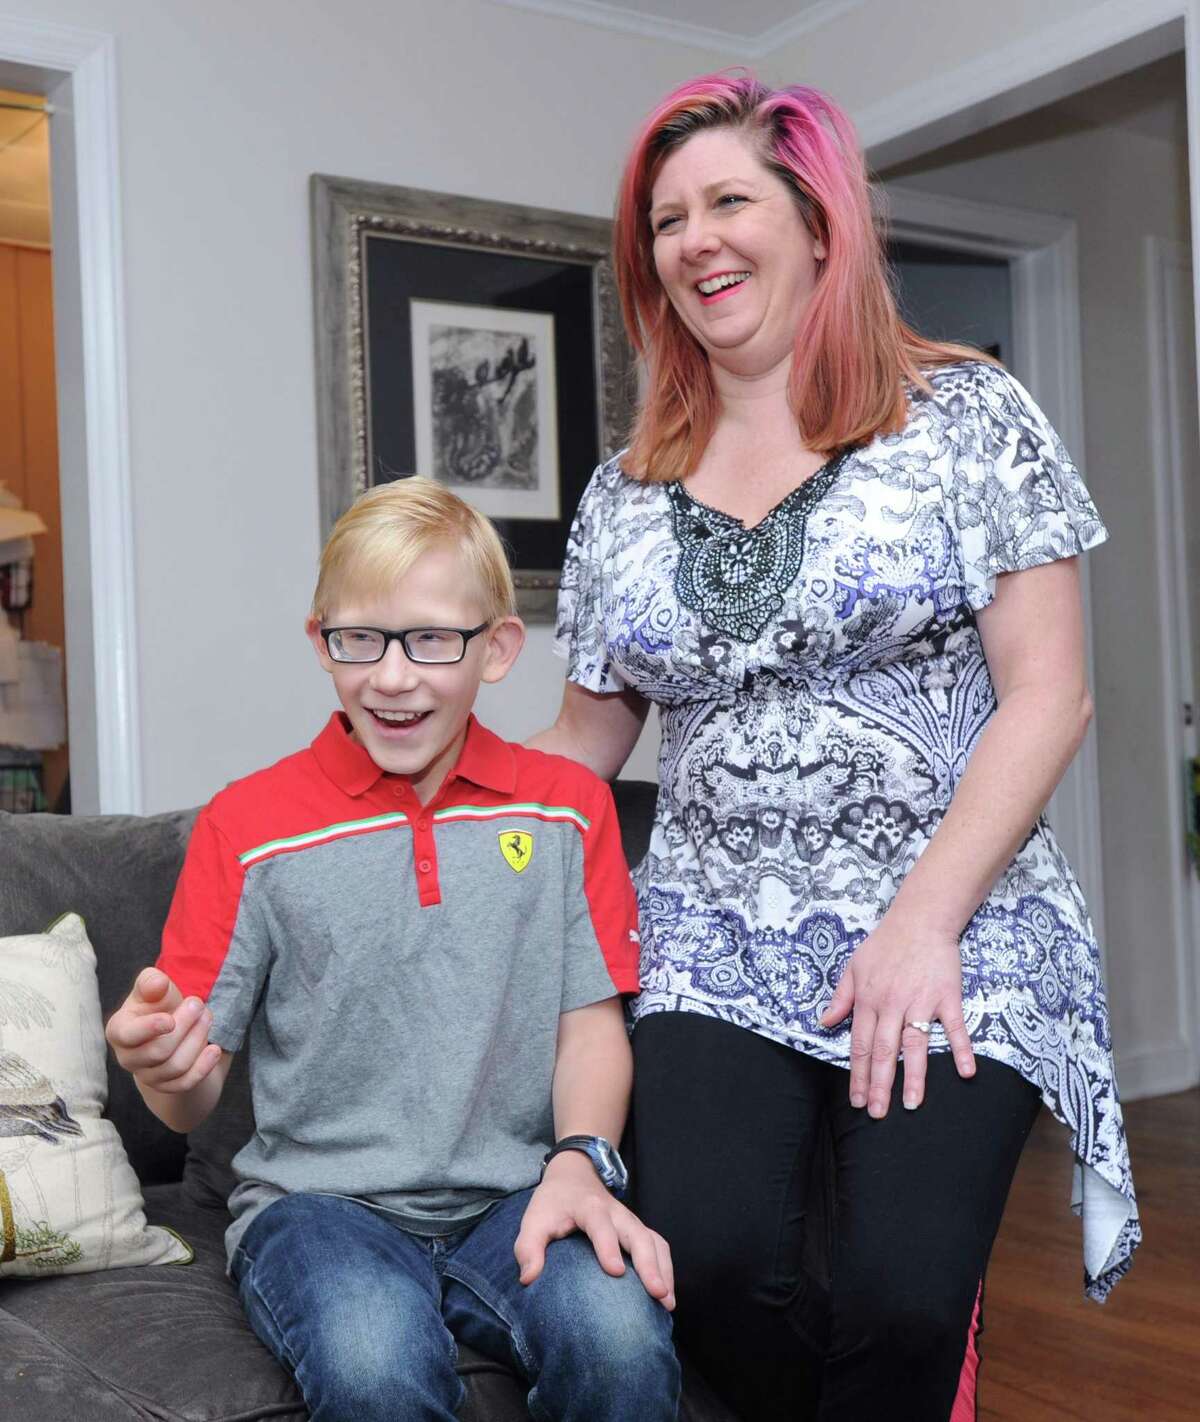 Connor O'Neill, 11, and his mom, Damara O'Neill, speak about Connor's Make-A-Wish Foundation Mediterranean cruise that he took last year at his home in Darien, Conn., Friday, Sept. 29, 2017.